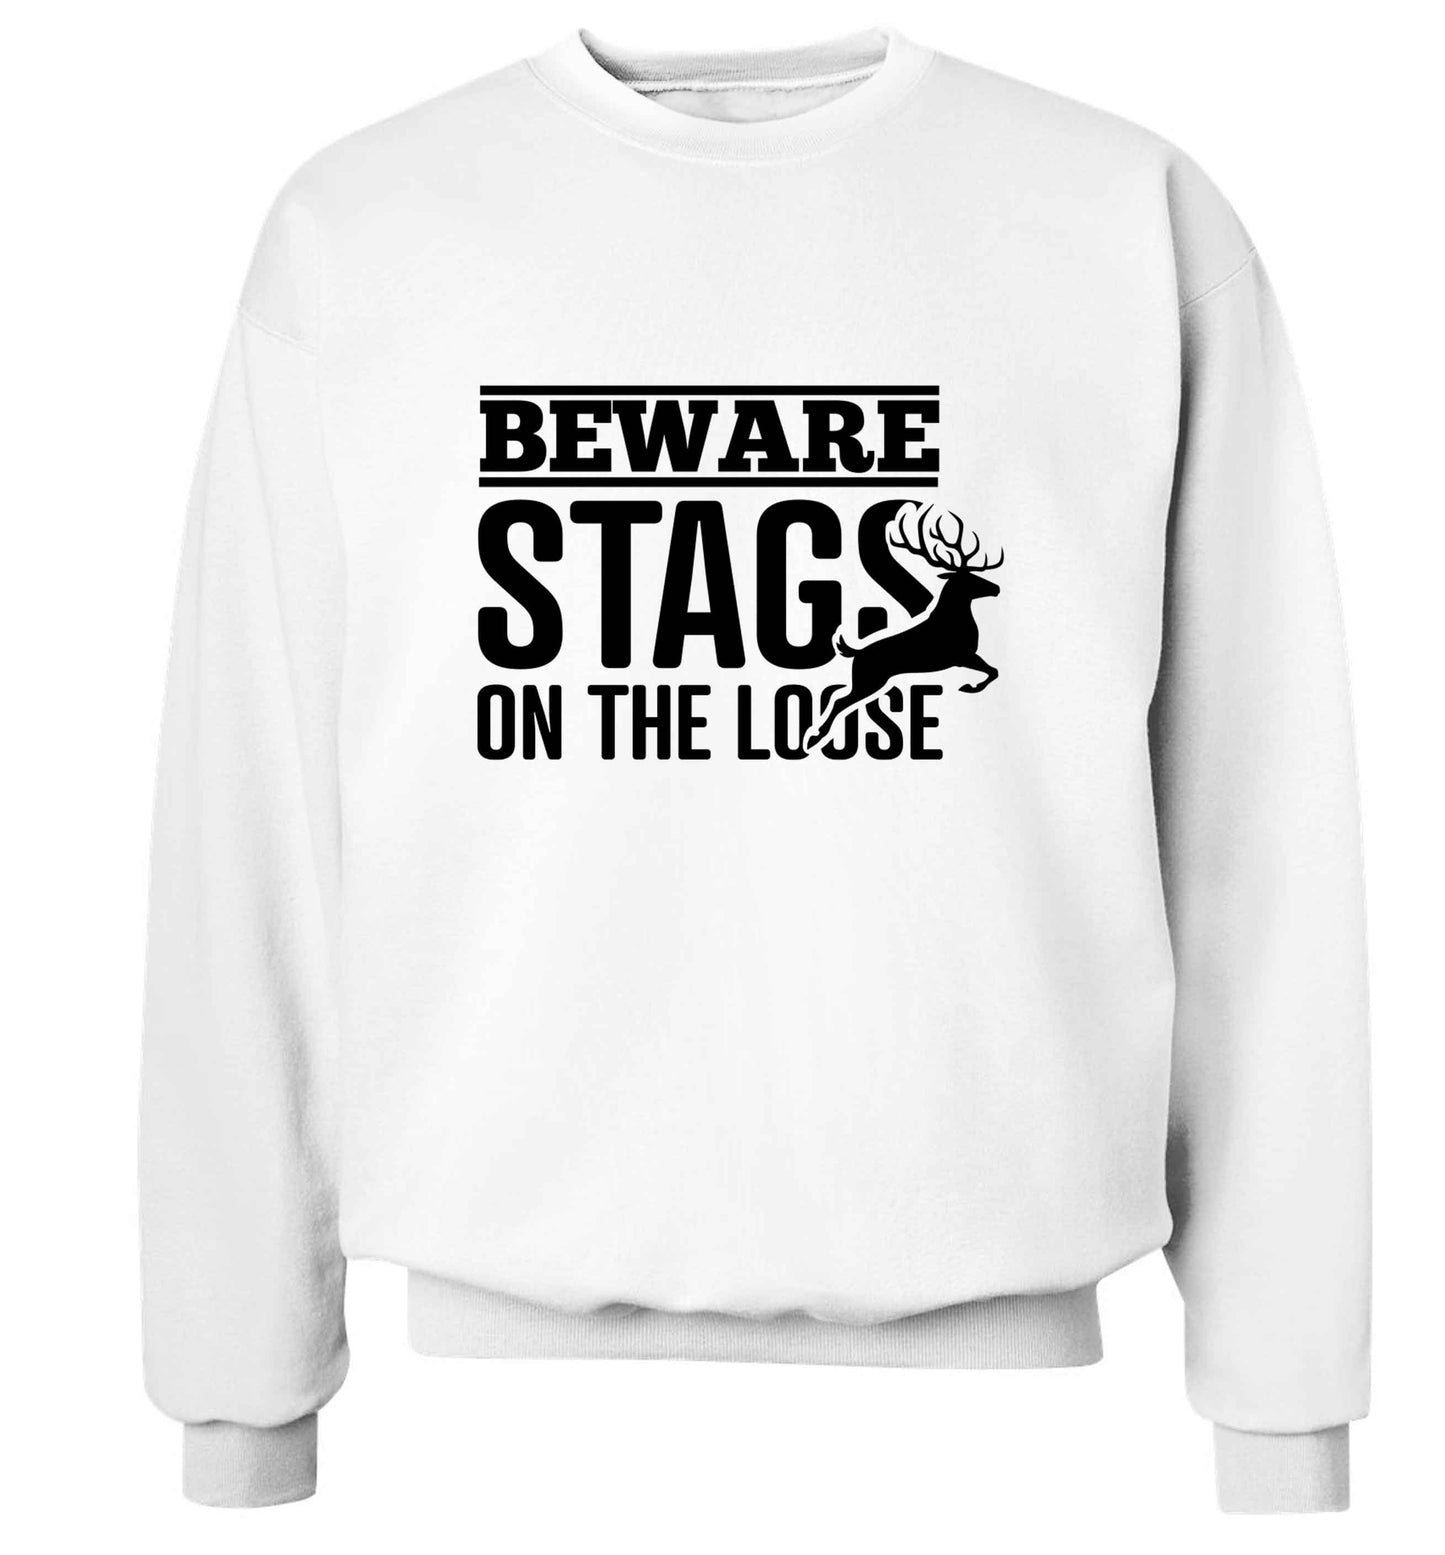 Beware stags on the loose adult's unisex white sweater 2XL